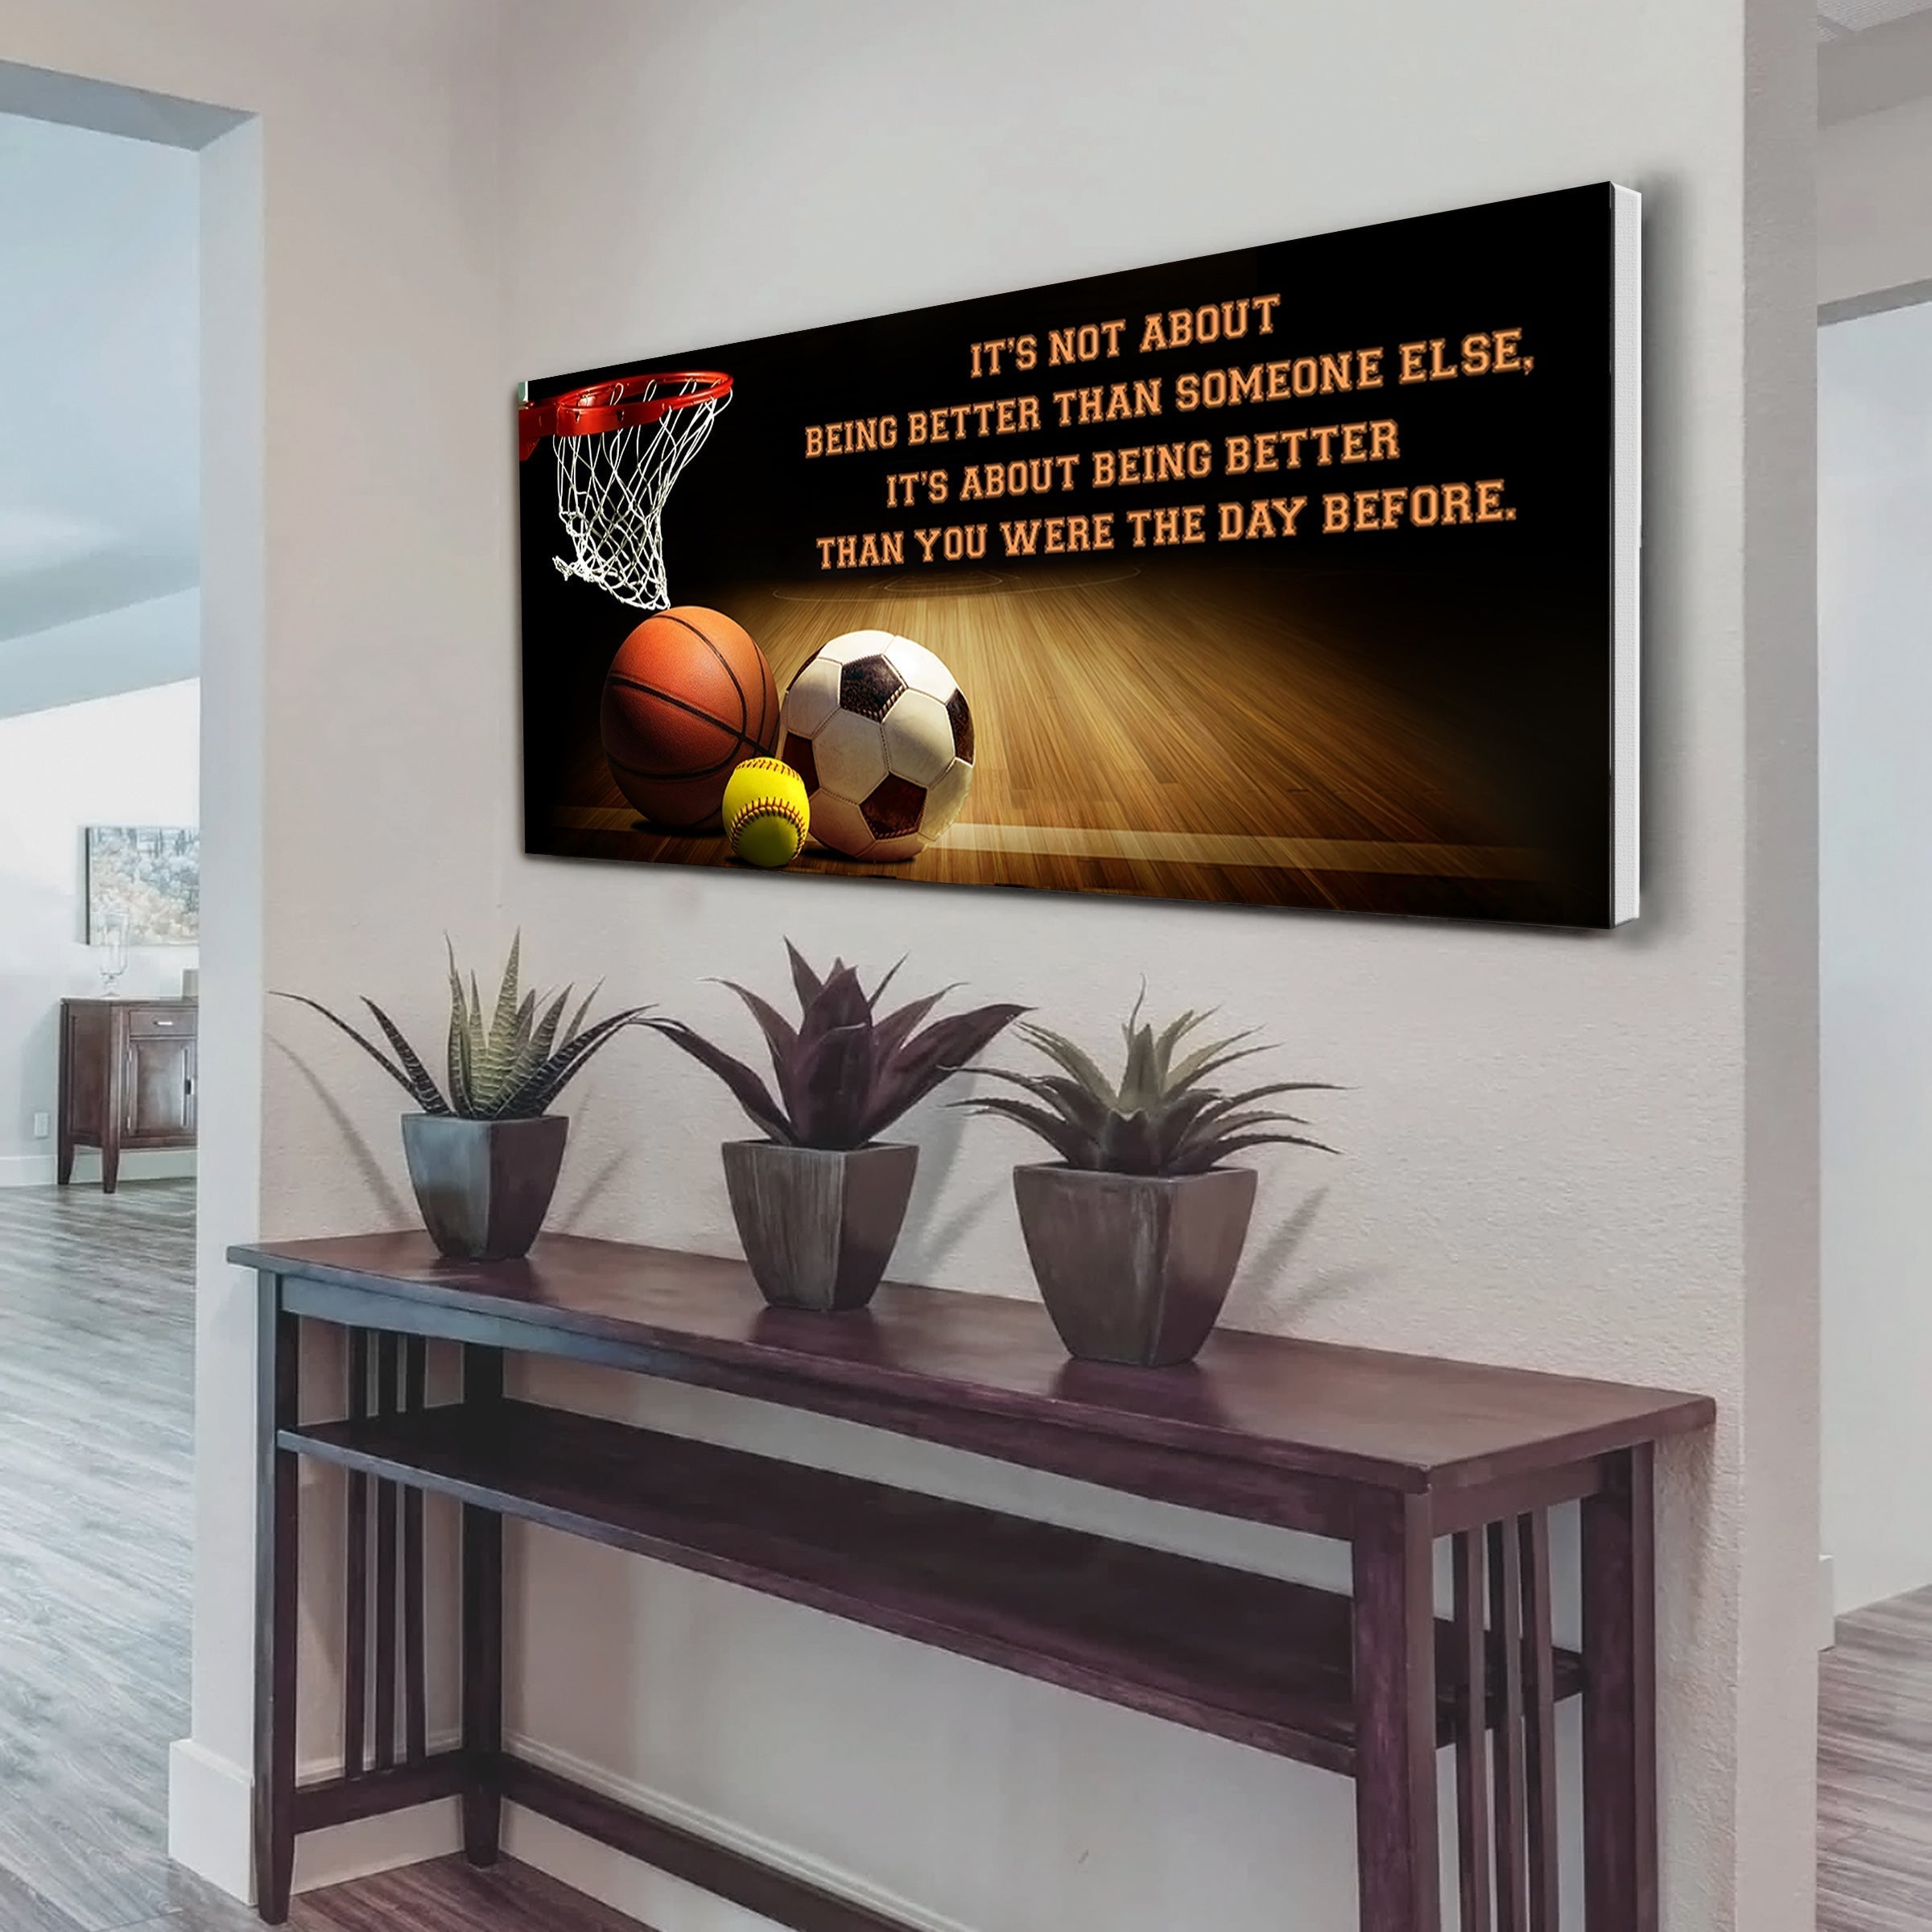 Customizable Basketball, soccer, softball poster canvas- It's not about being better than someone else